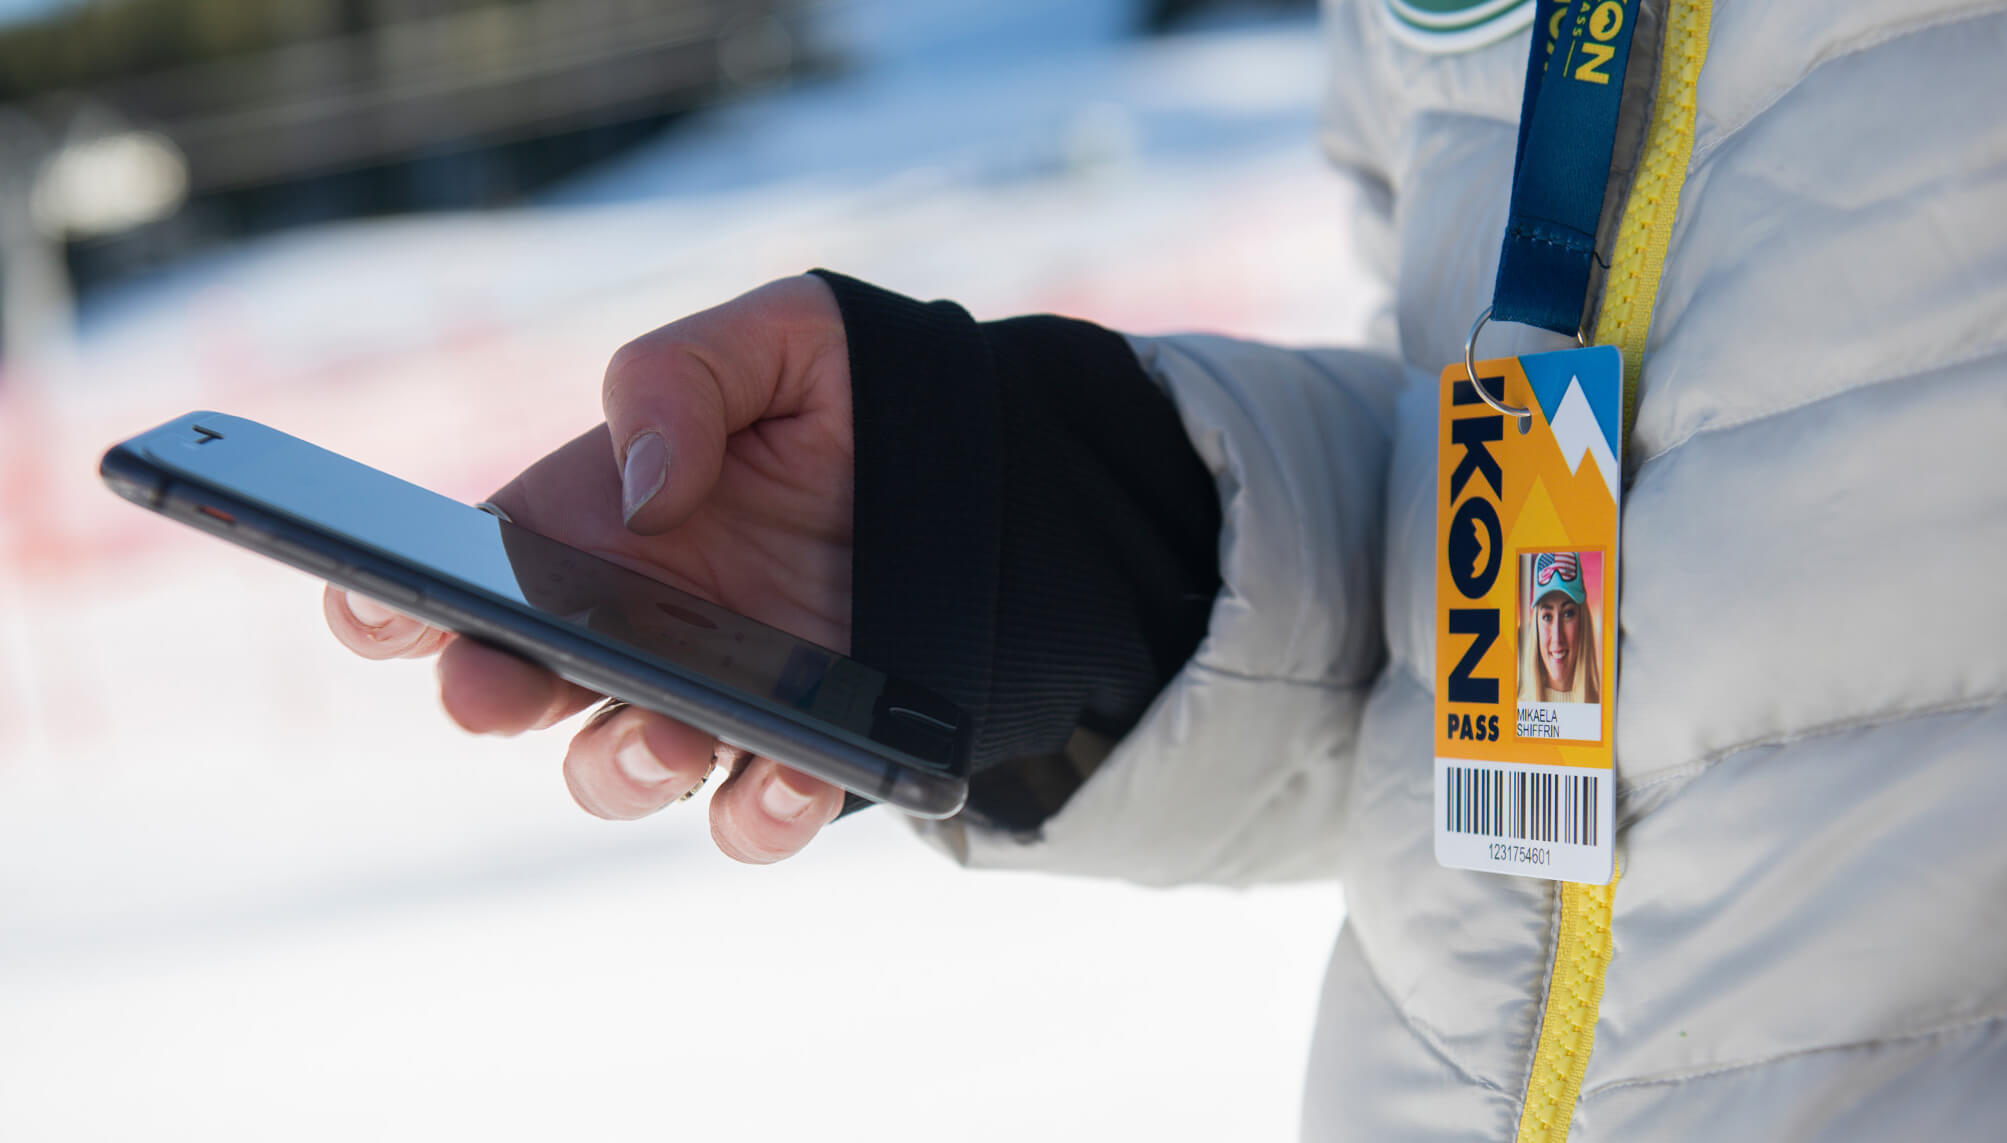 Ikon Pass Mobile App: Tips to Connect with Adventure